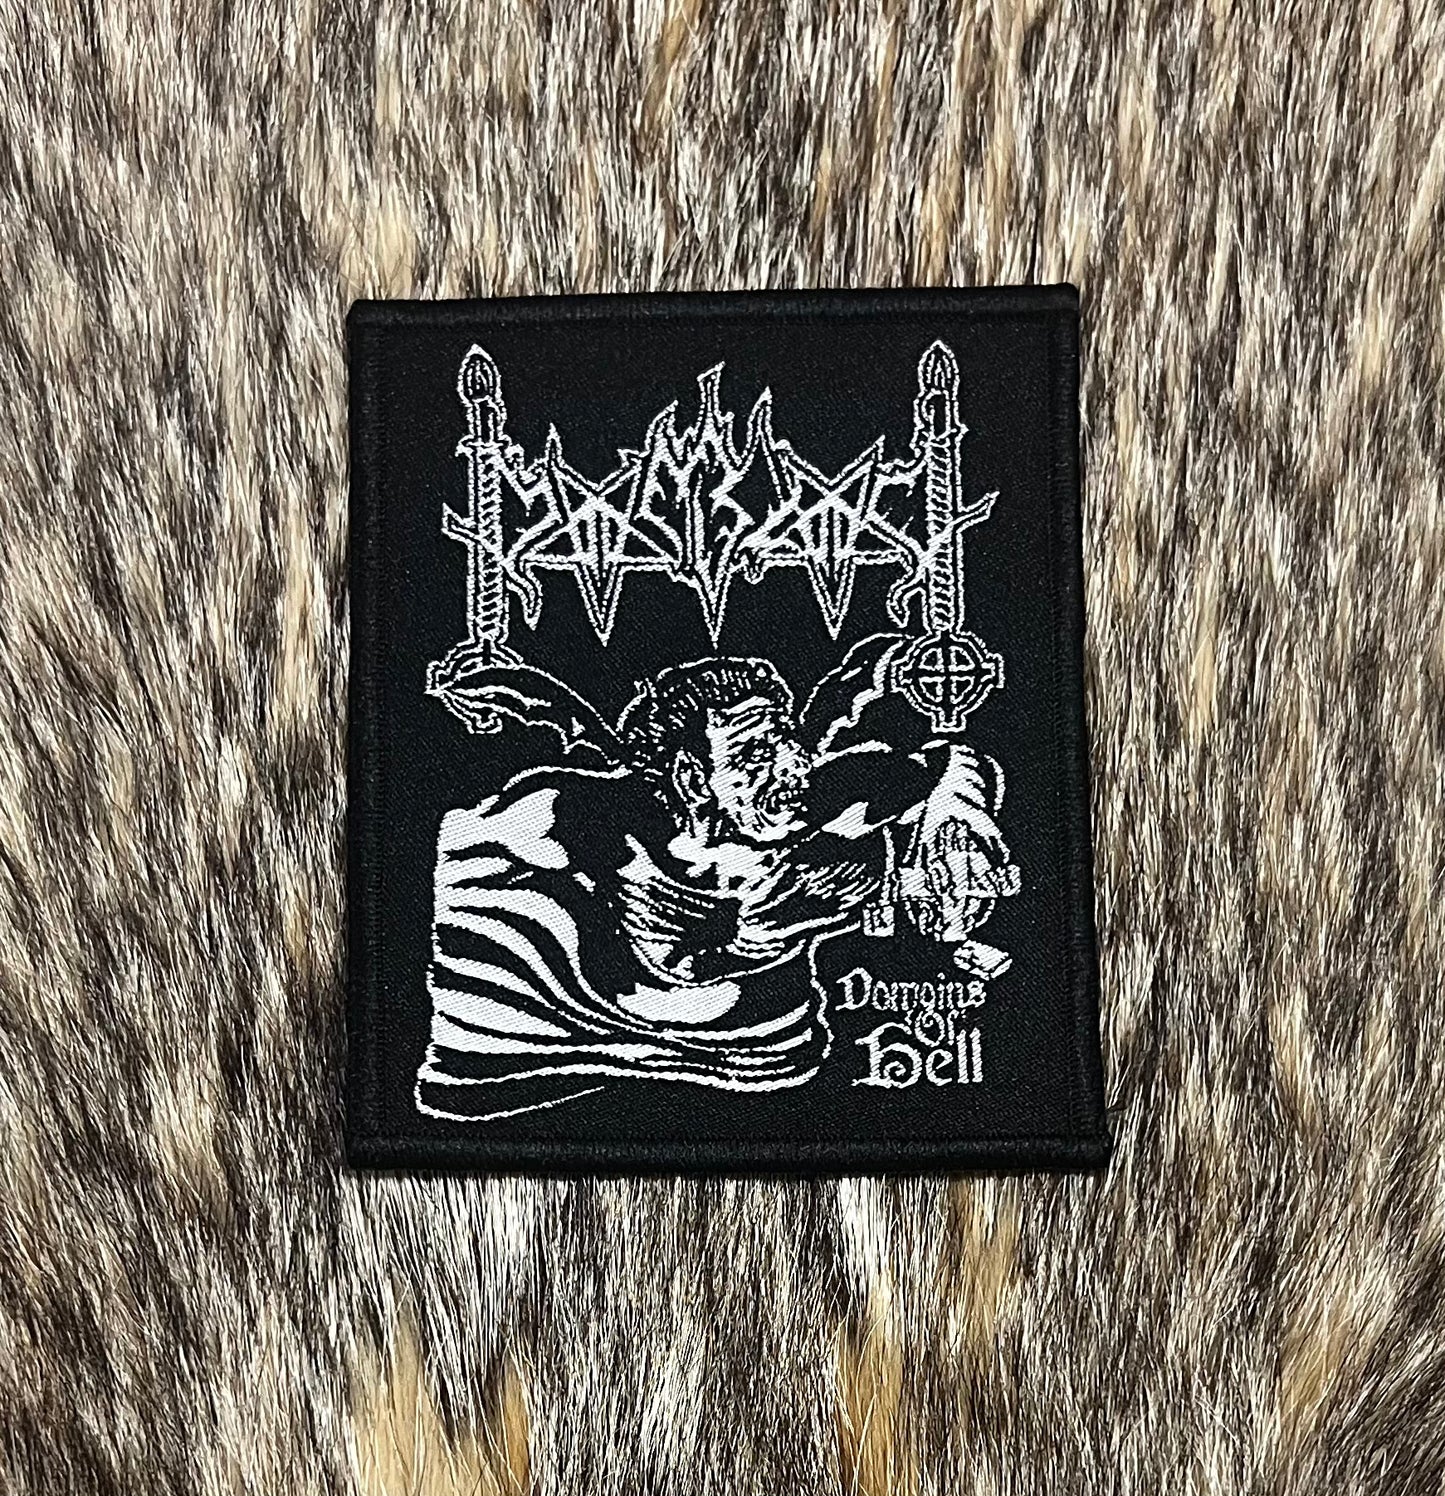 Moonblood - Domains Of Hell Patch